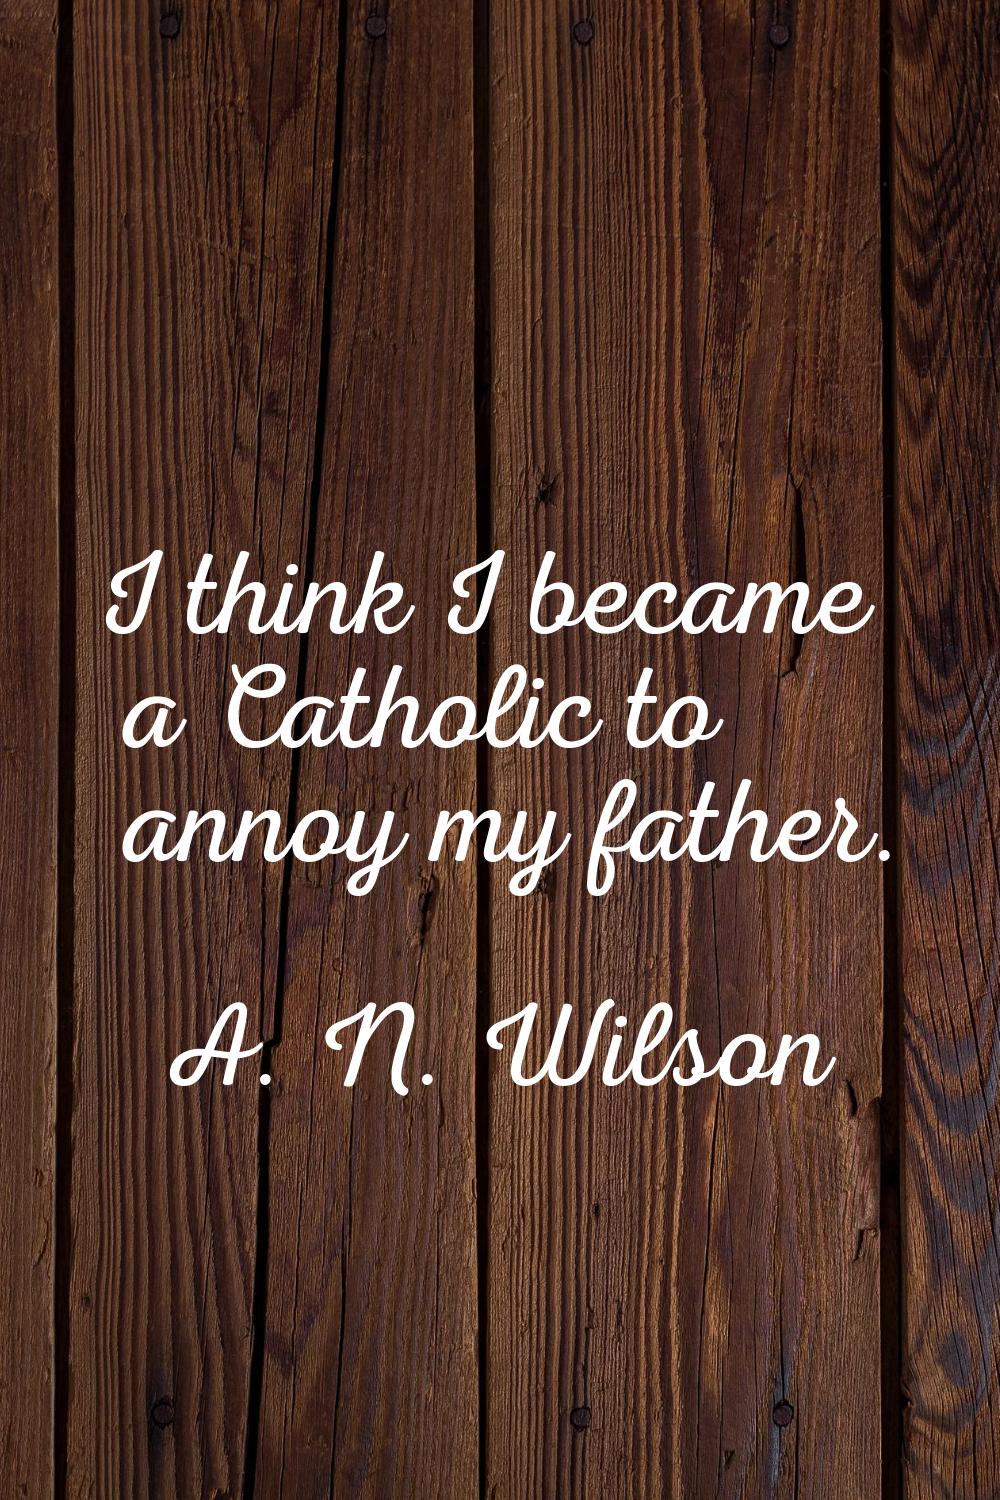 I think I became a Catholic to annoy my father.